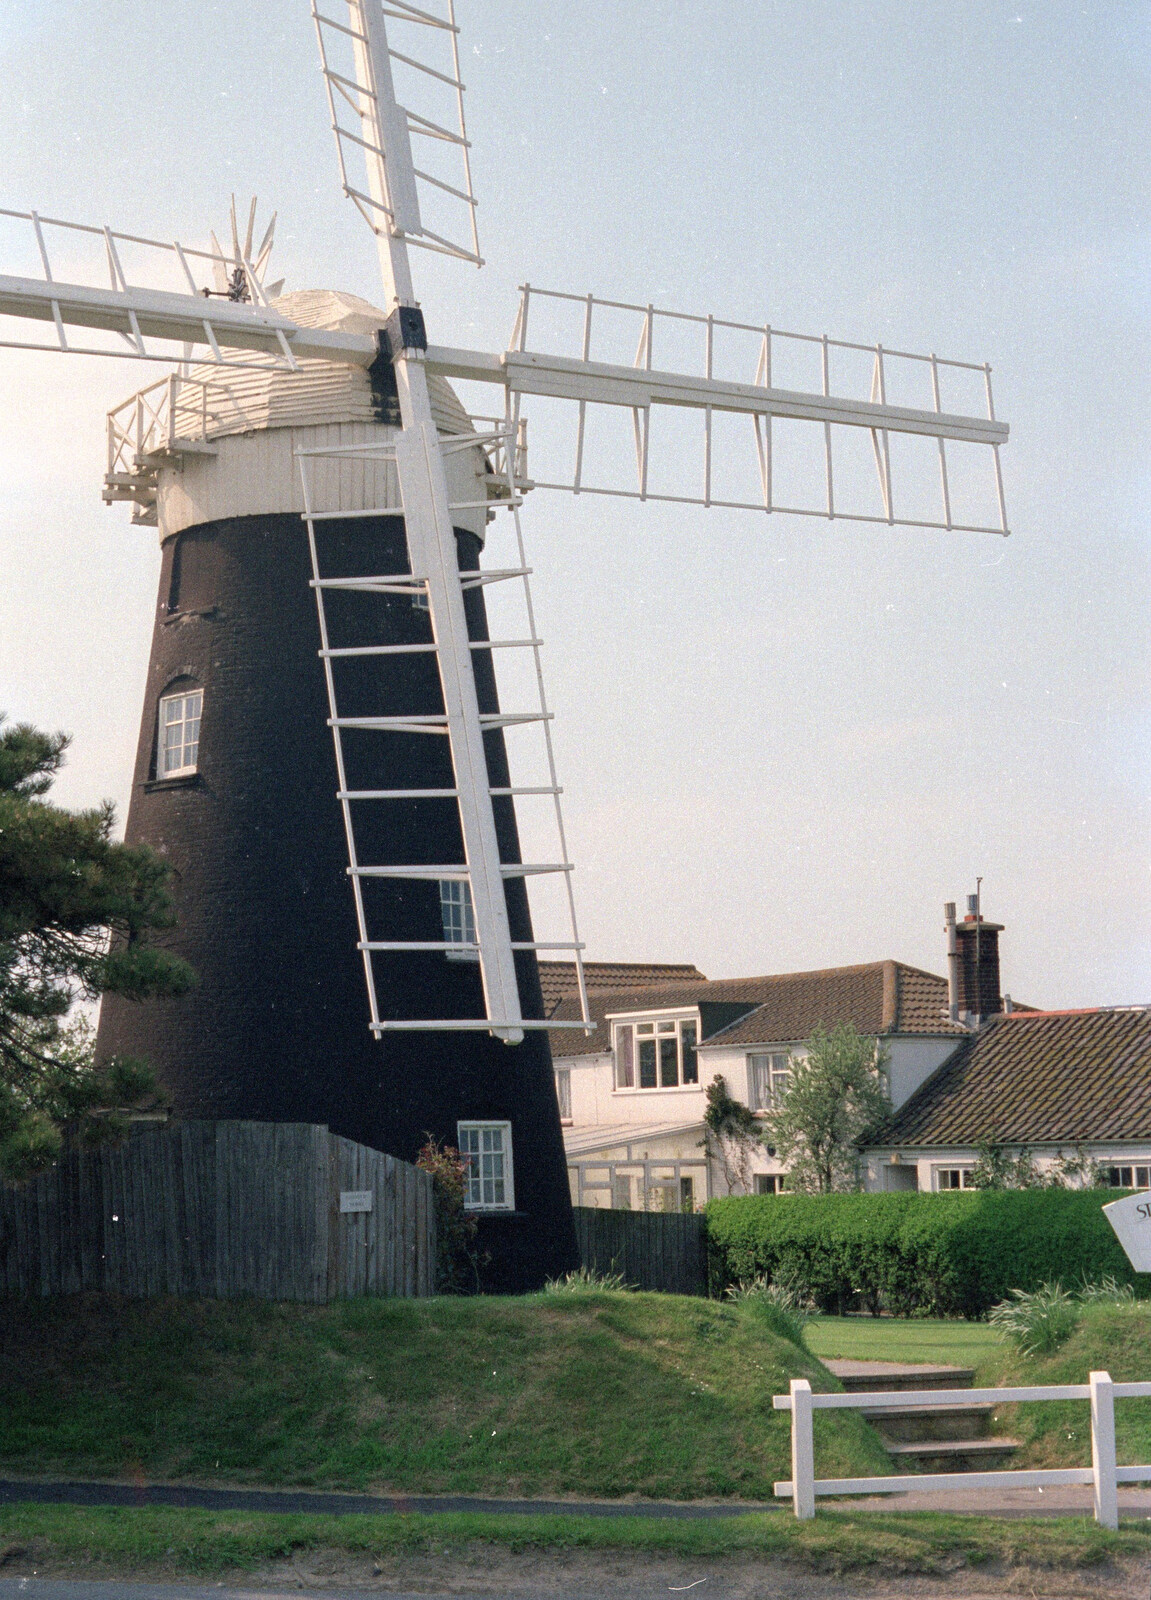 Another broads windpump from The Plymouth Gang Visits Nosher in the Sticks, Red House, Buxton, Norfolk - 20th May 1988